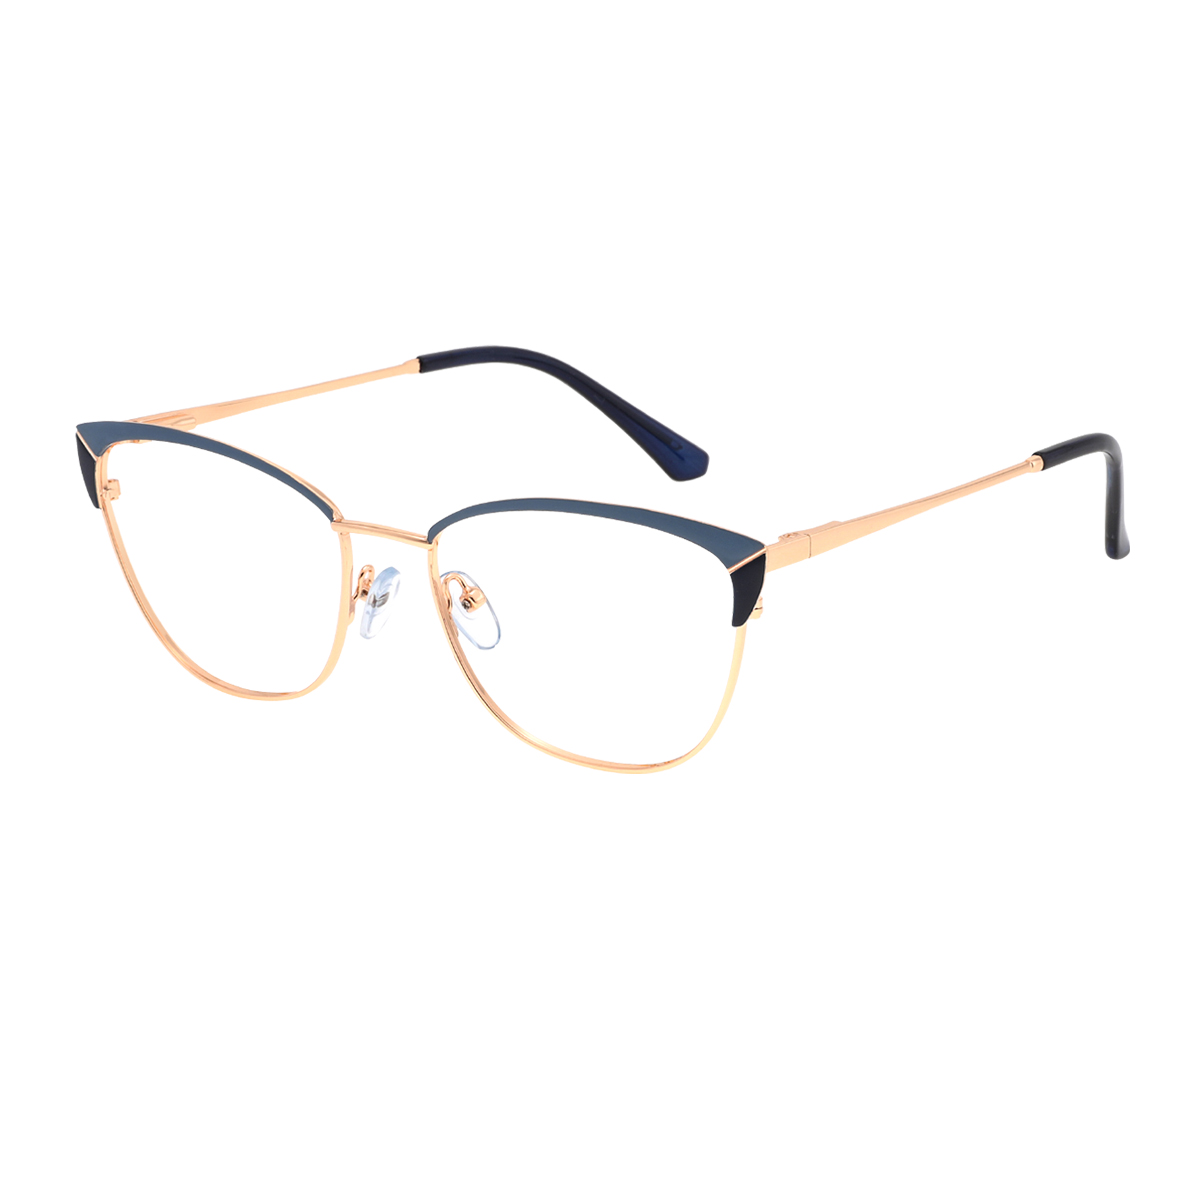 Carolyn - Browline Blue-gold Reading Glasses for Women